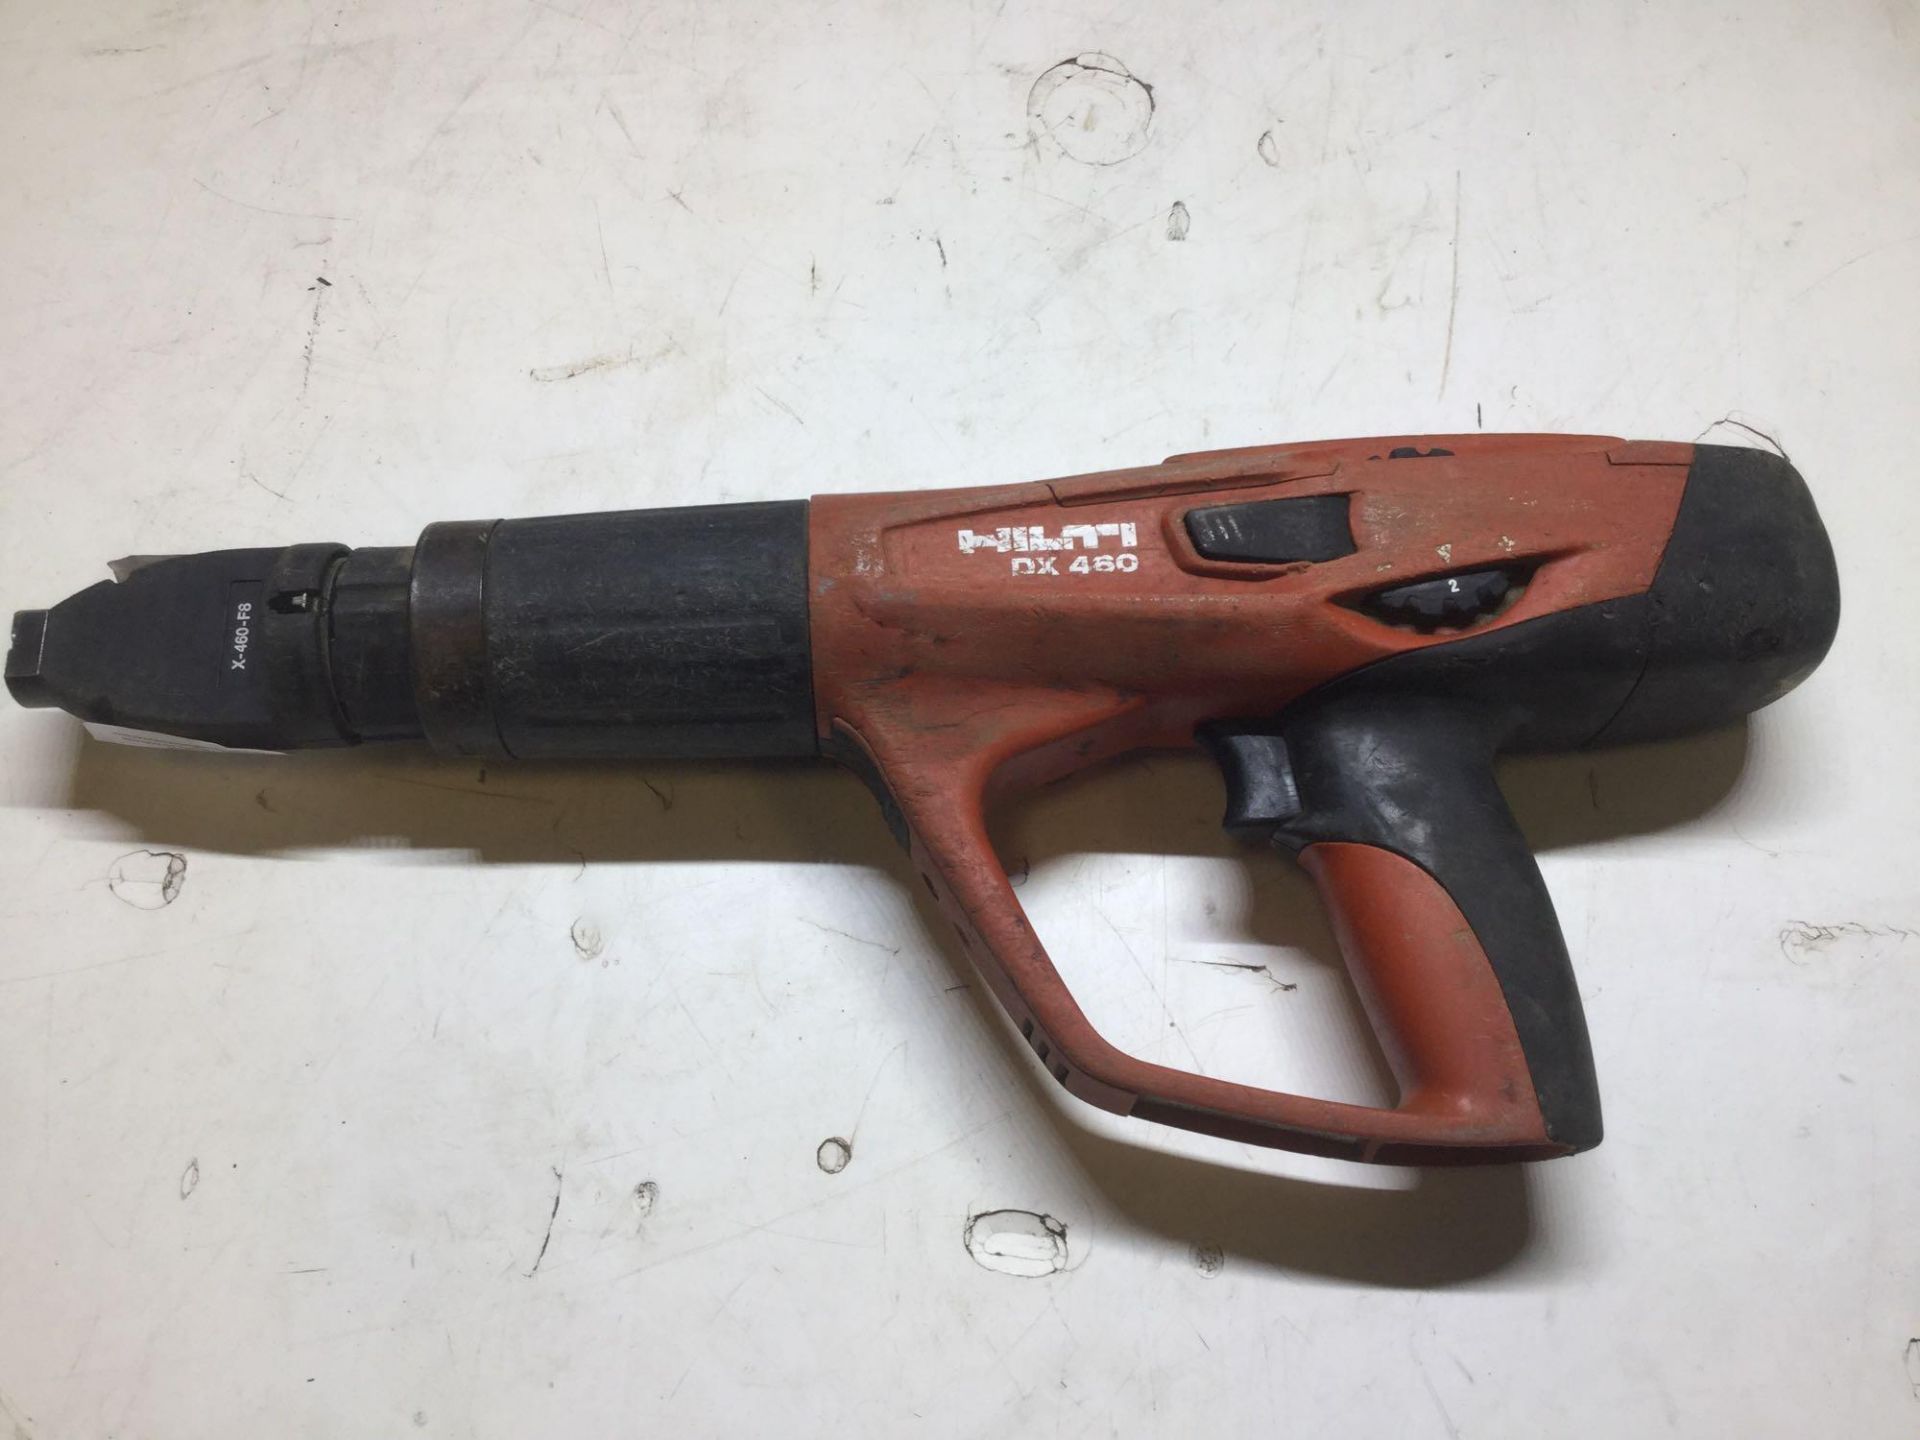 Hilti DX460 Explosive Charge Nail Gun - Image 2 of 3